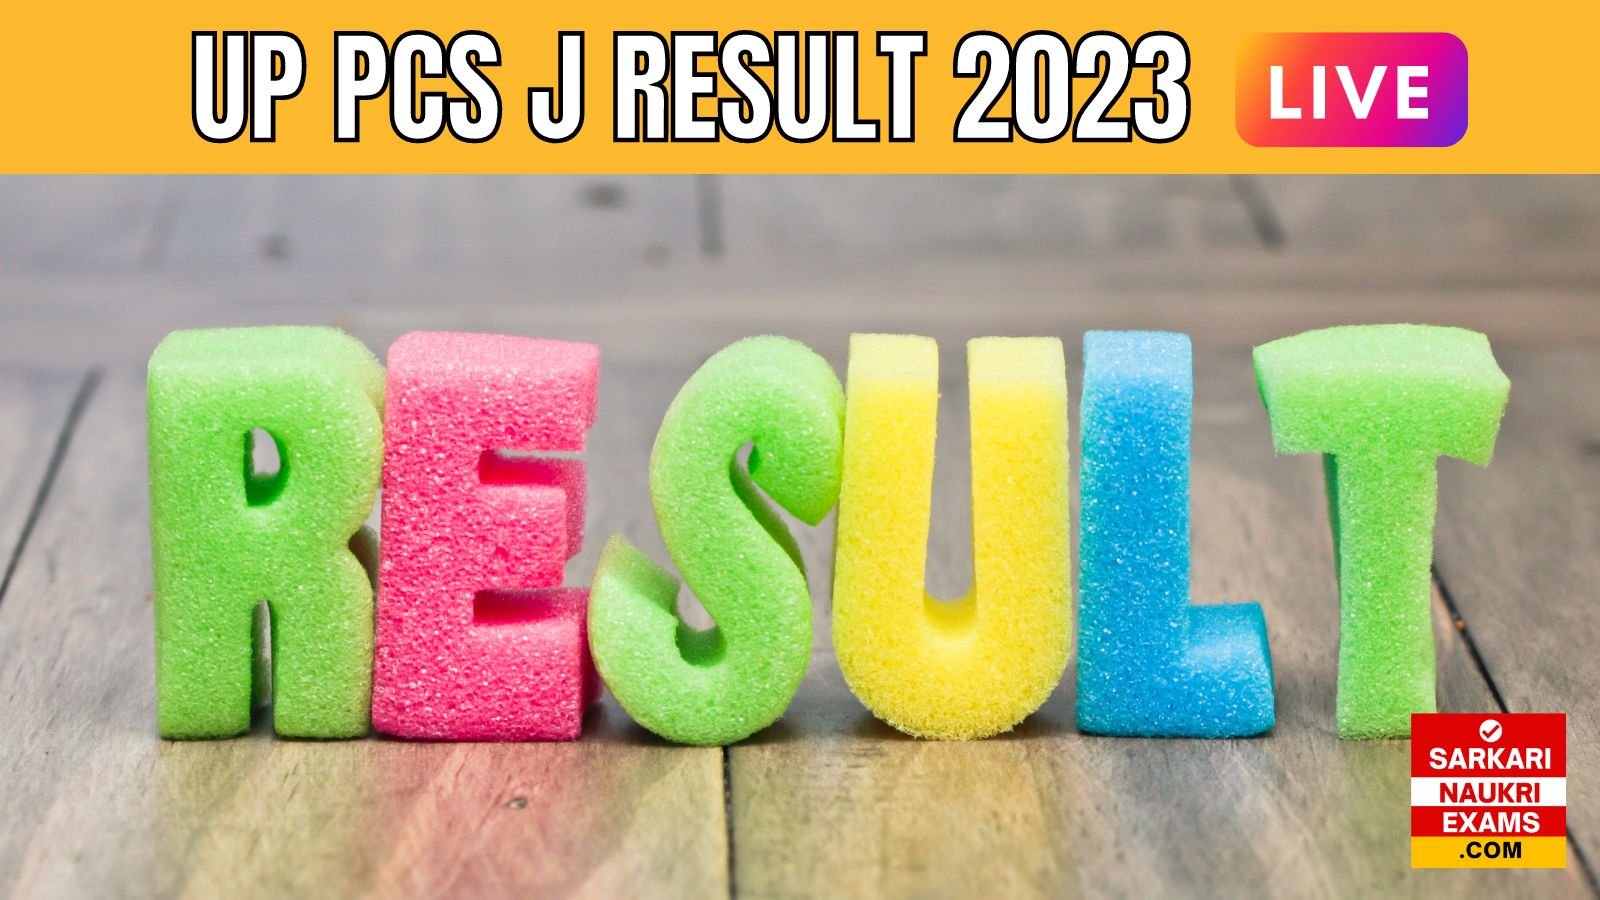 UP PCS J Result 2023 | 3145 Candidate Qualified - Check Prelims Result Now!